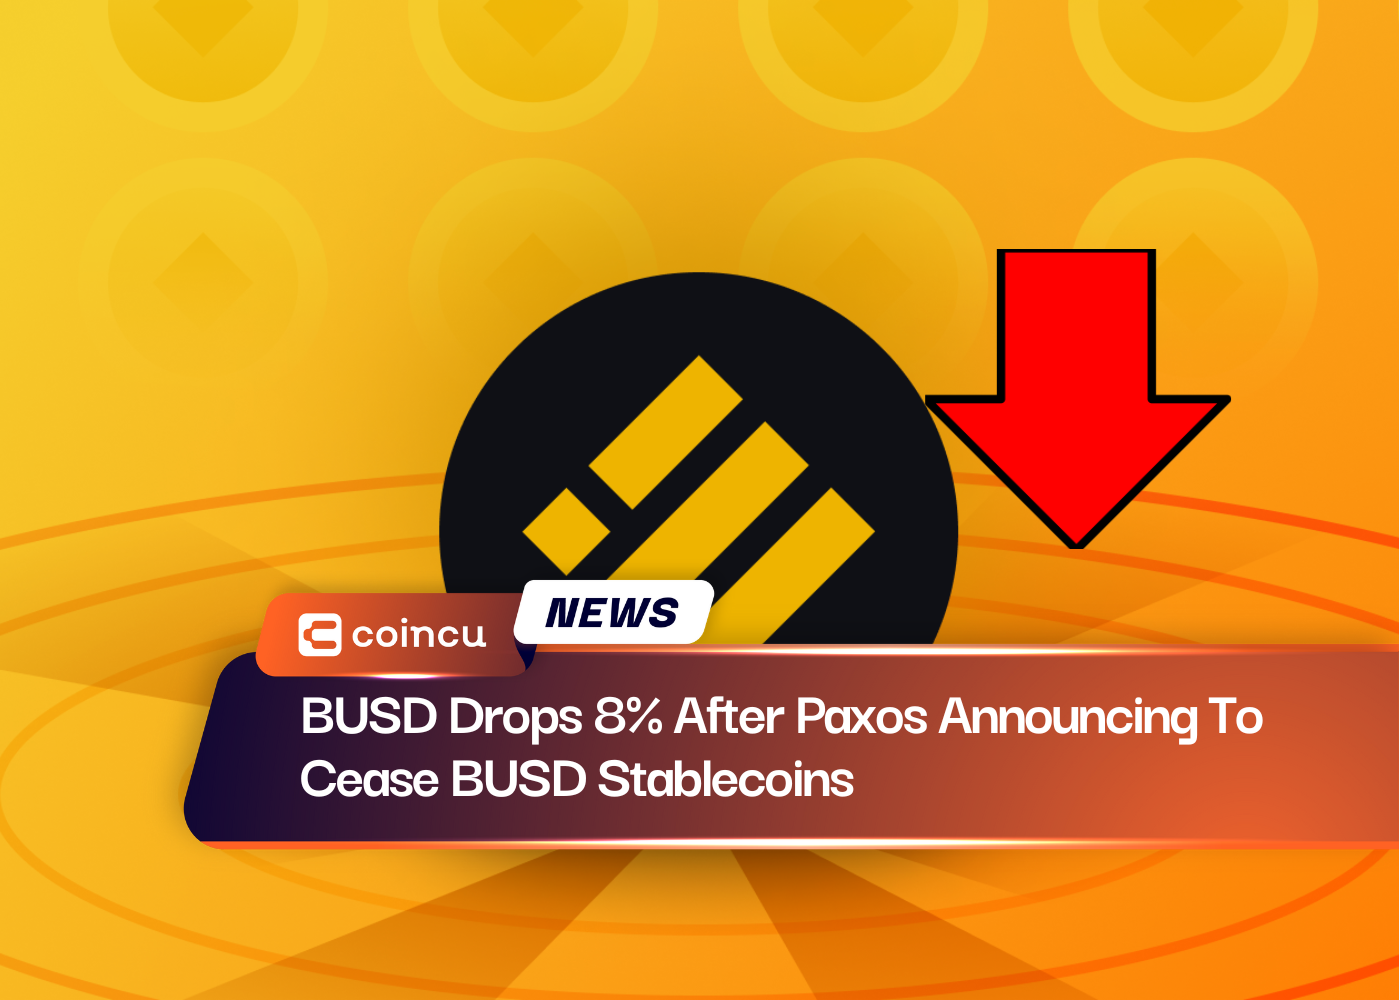 BUSD Drops 8% After Paxos Announcing To Cease BUSD Stablecoins